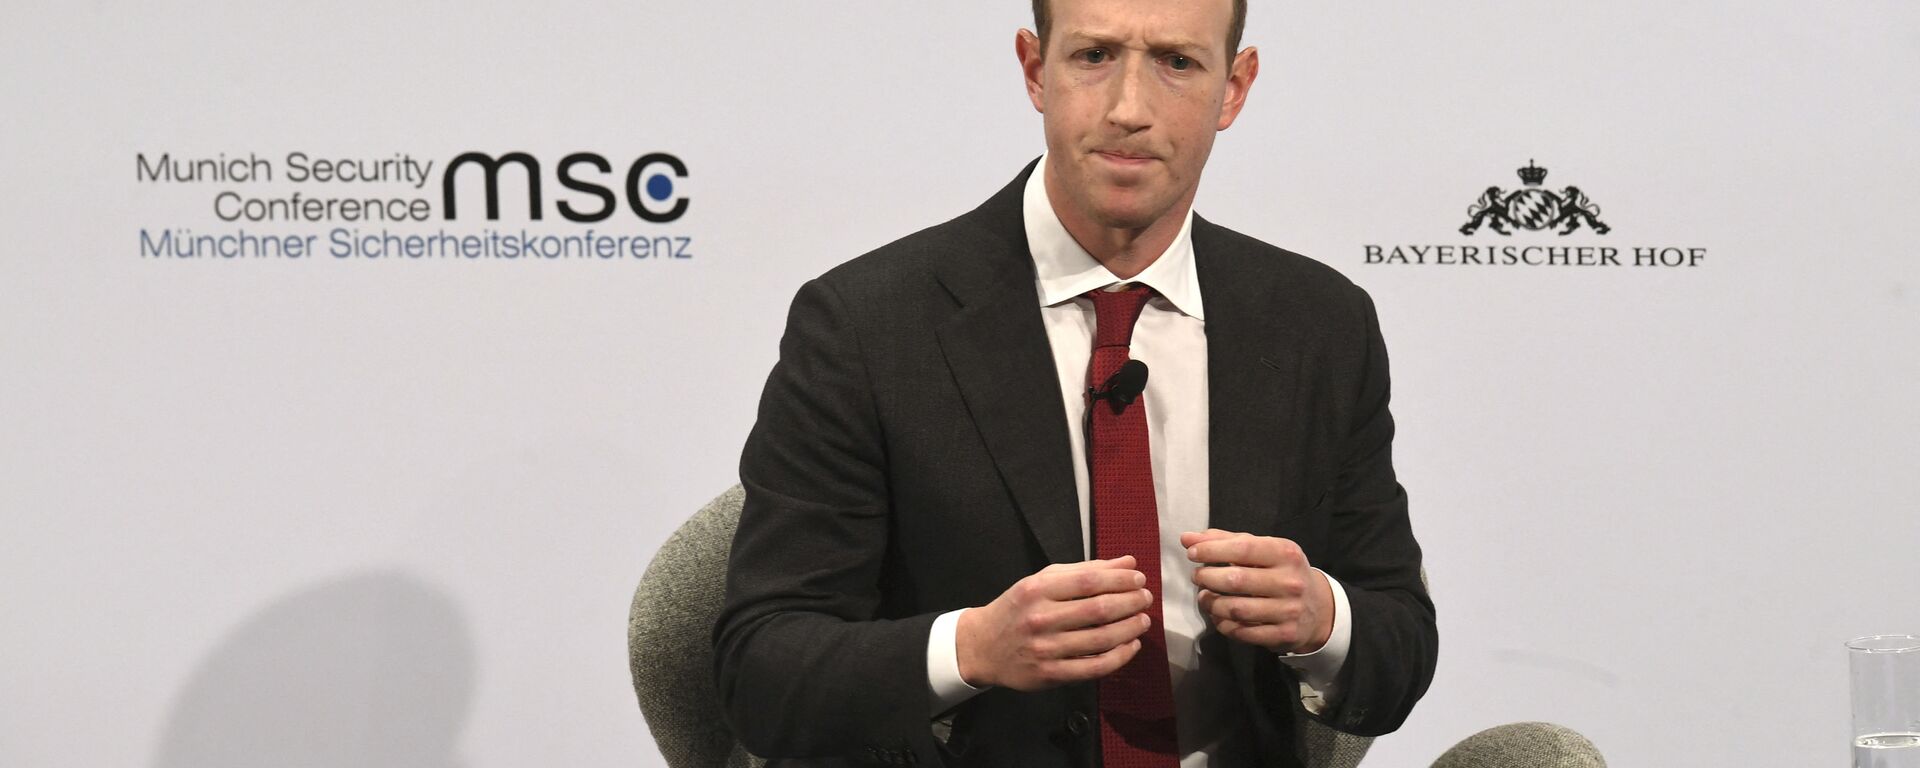 The founder and CEO of Facebook Mark Zuckerberg speaks during the 56th Munich Security Conference (MSC) in Munich, southern Germany, on February 15, 2020. - The 2020 edition of the Munich Security Conference (MSC) takes place from February 14 to 16, 2020.  - Sputnik International, 1920, 02.11.2021